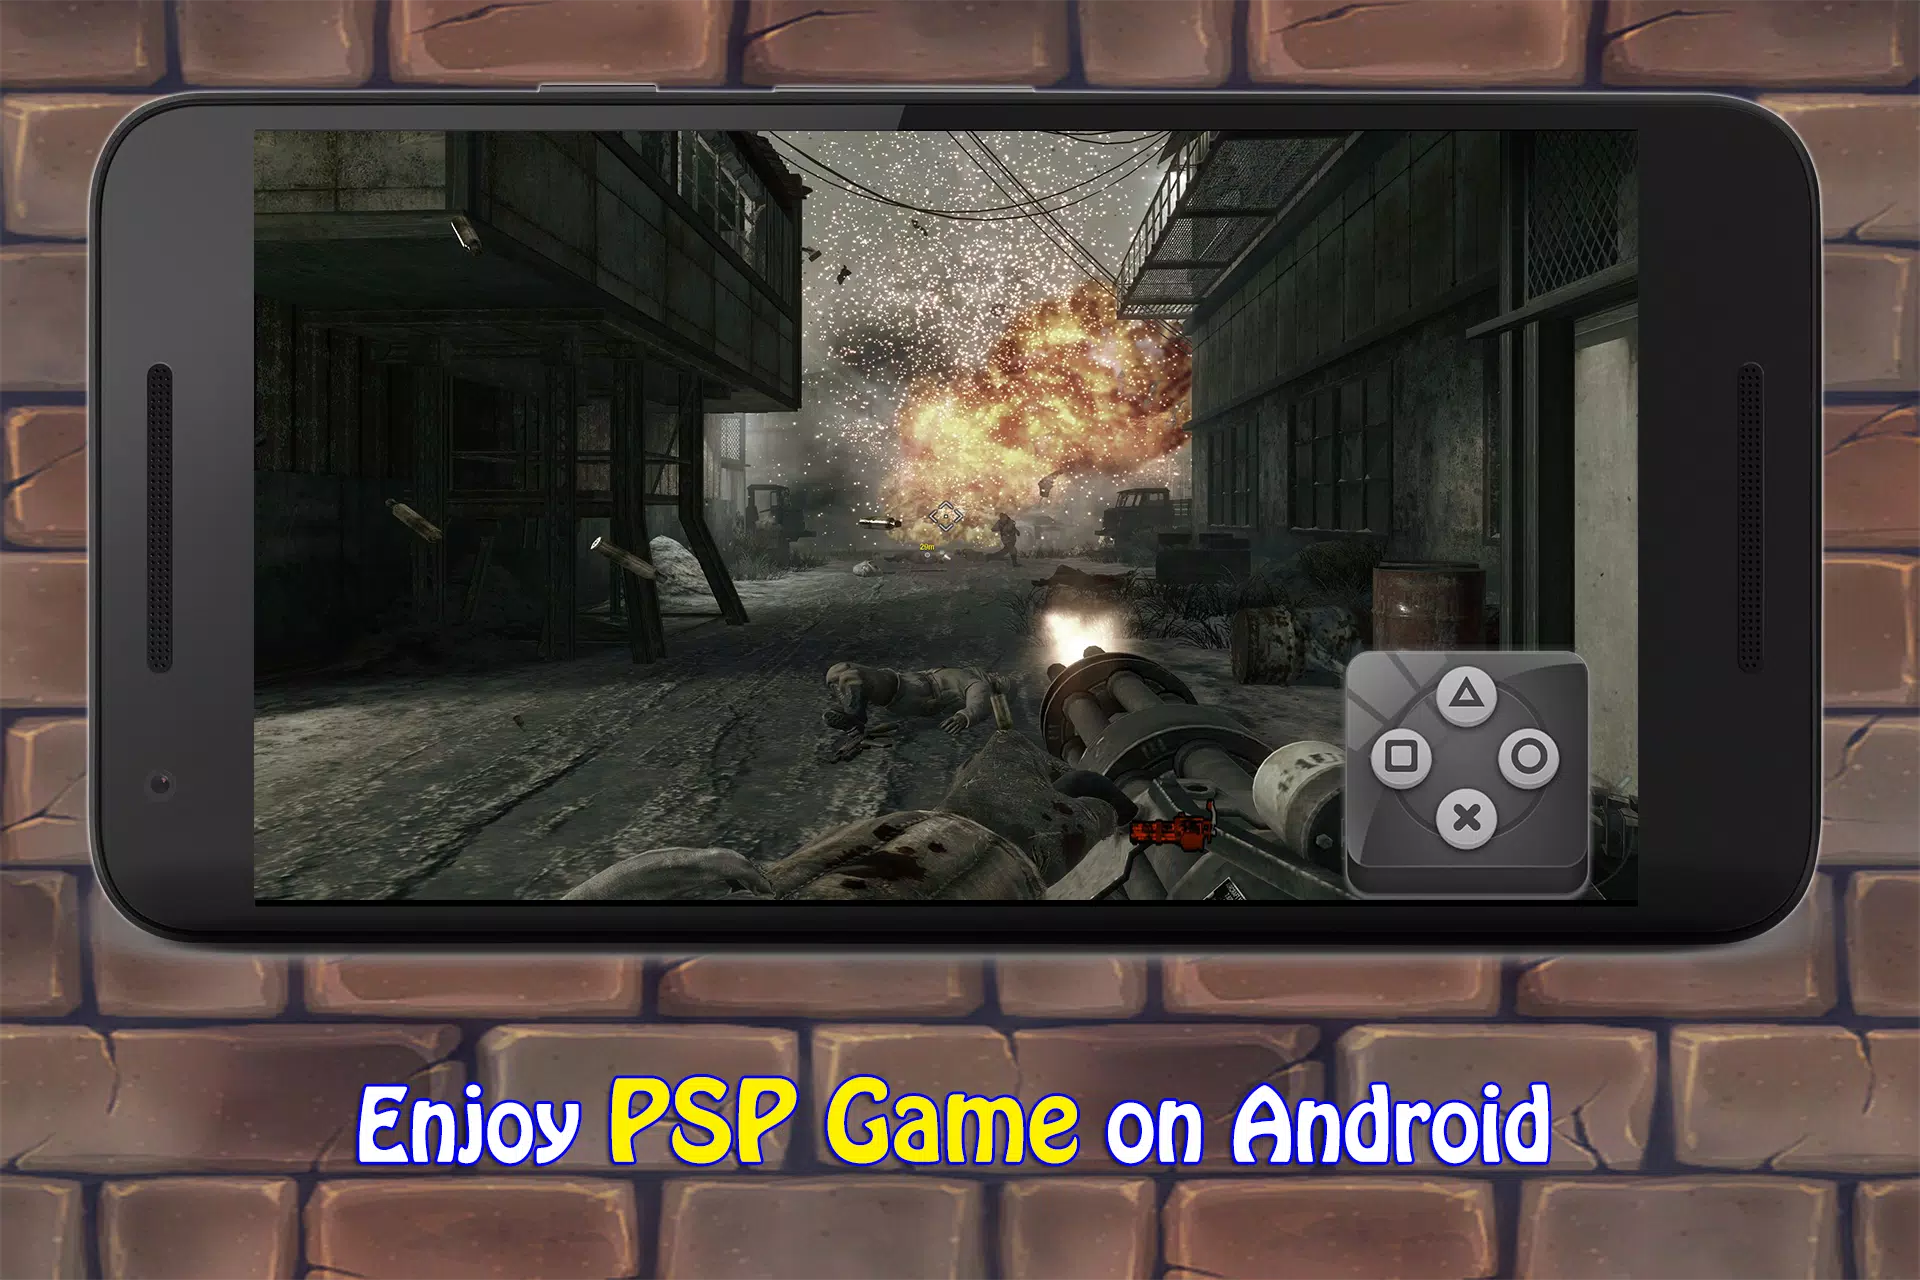 ANDROID GAMES, PPSSPP GAMES, PC GAMES